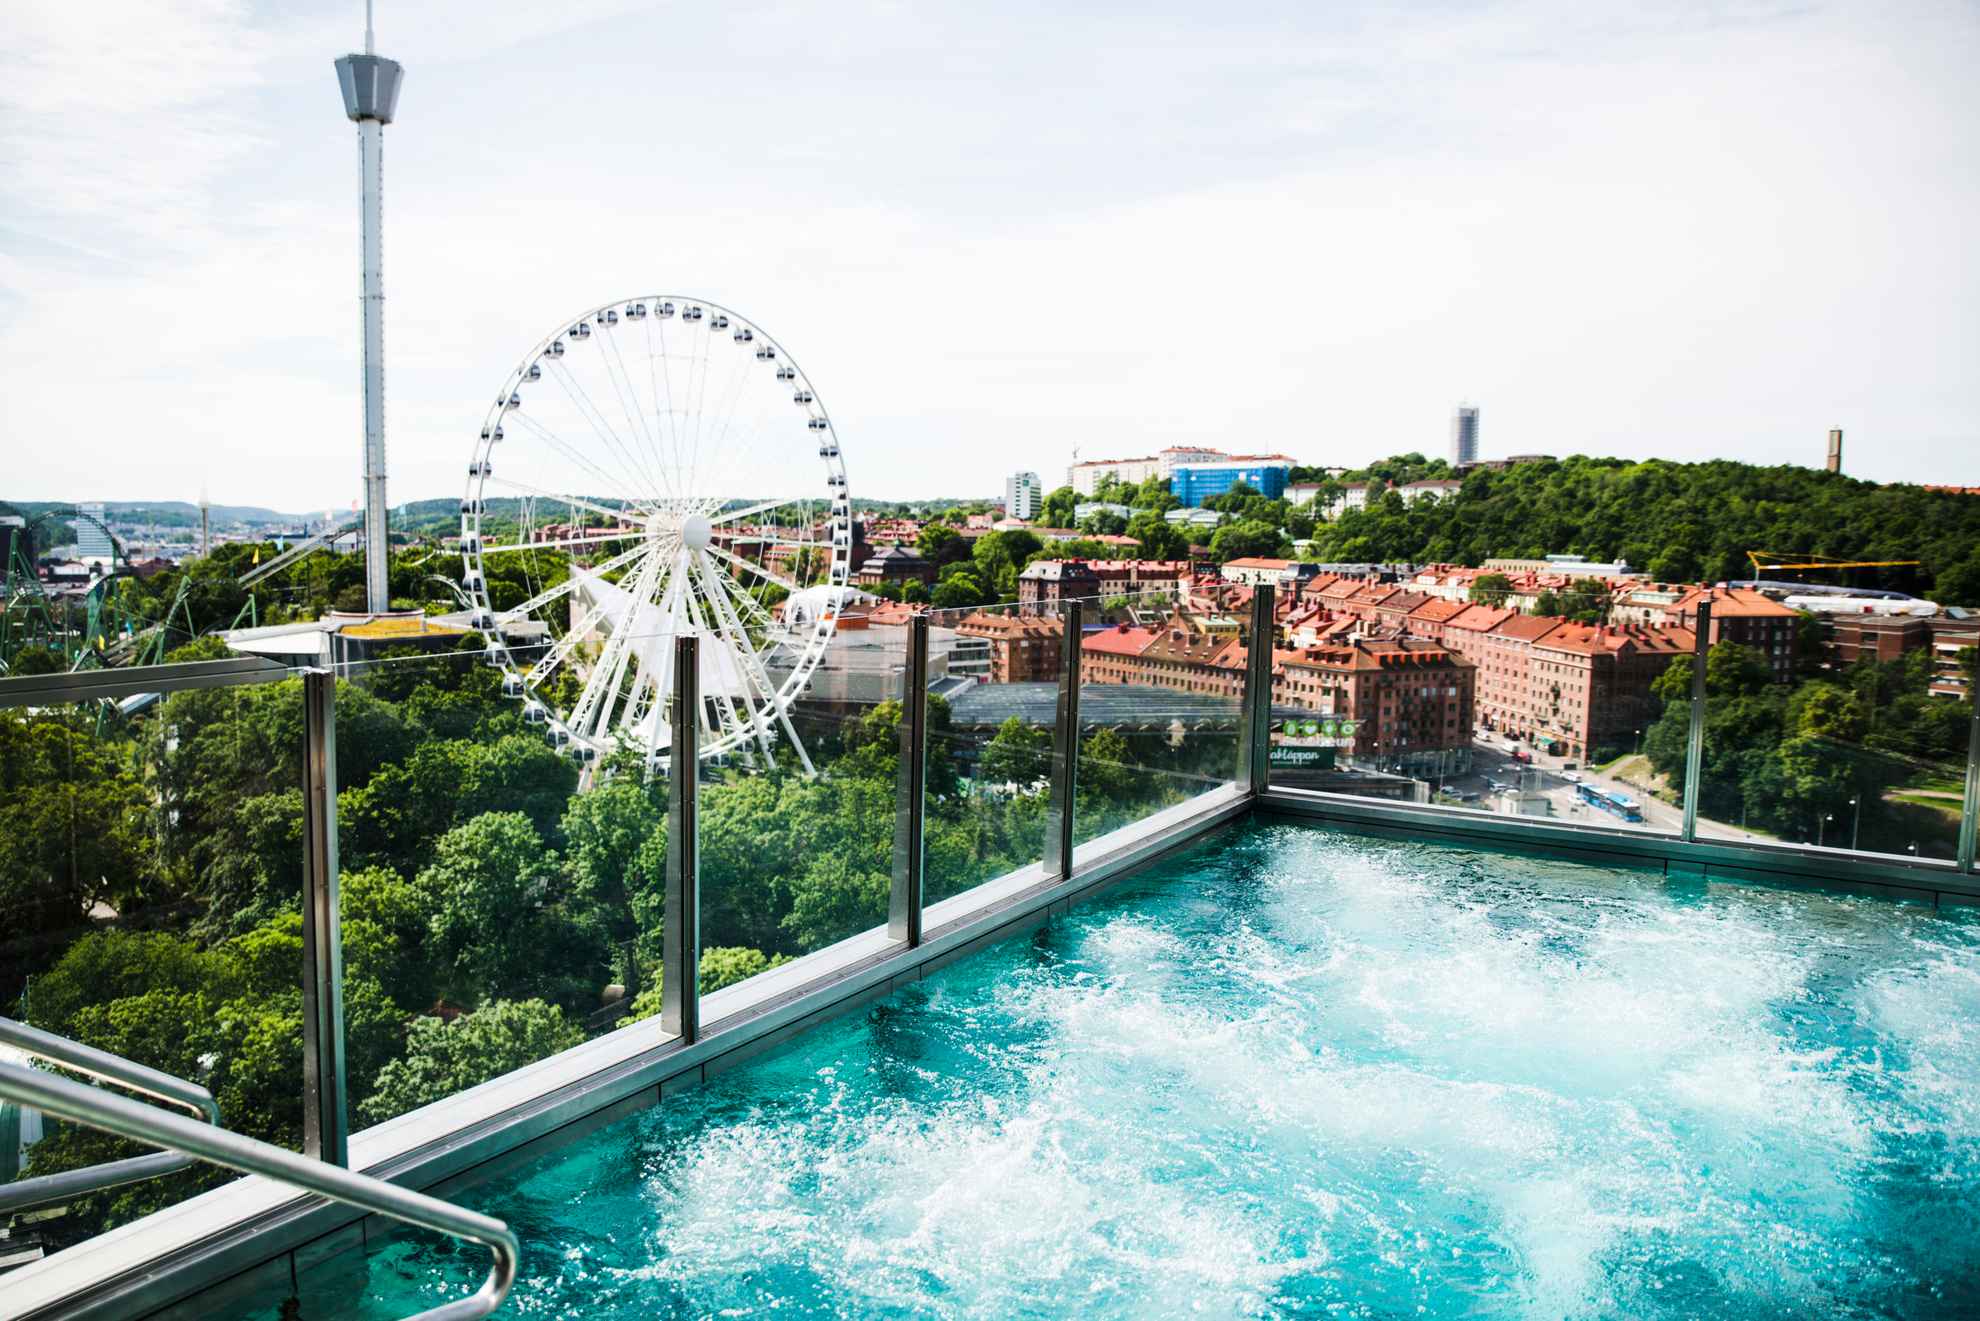 An outdoor pool with views over Liseberg and Gothenburg.